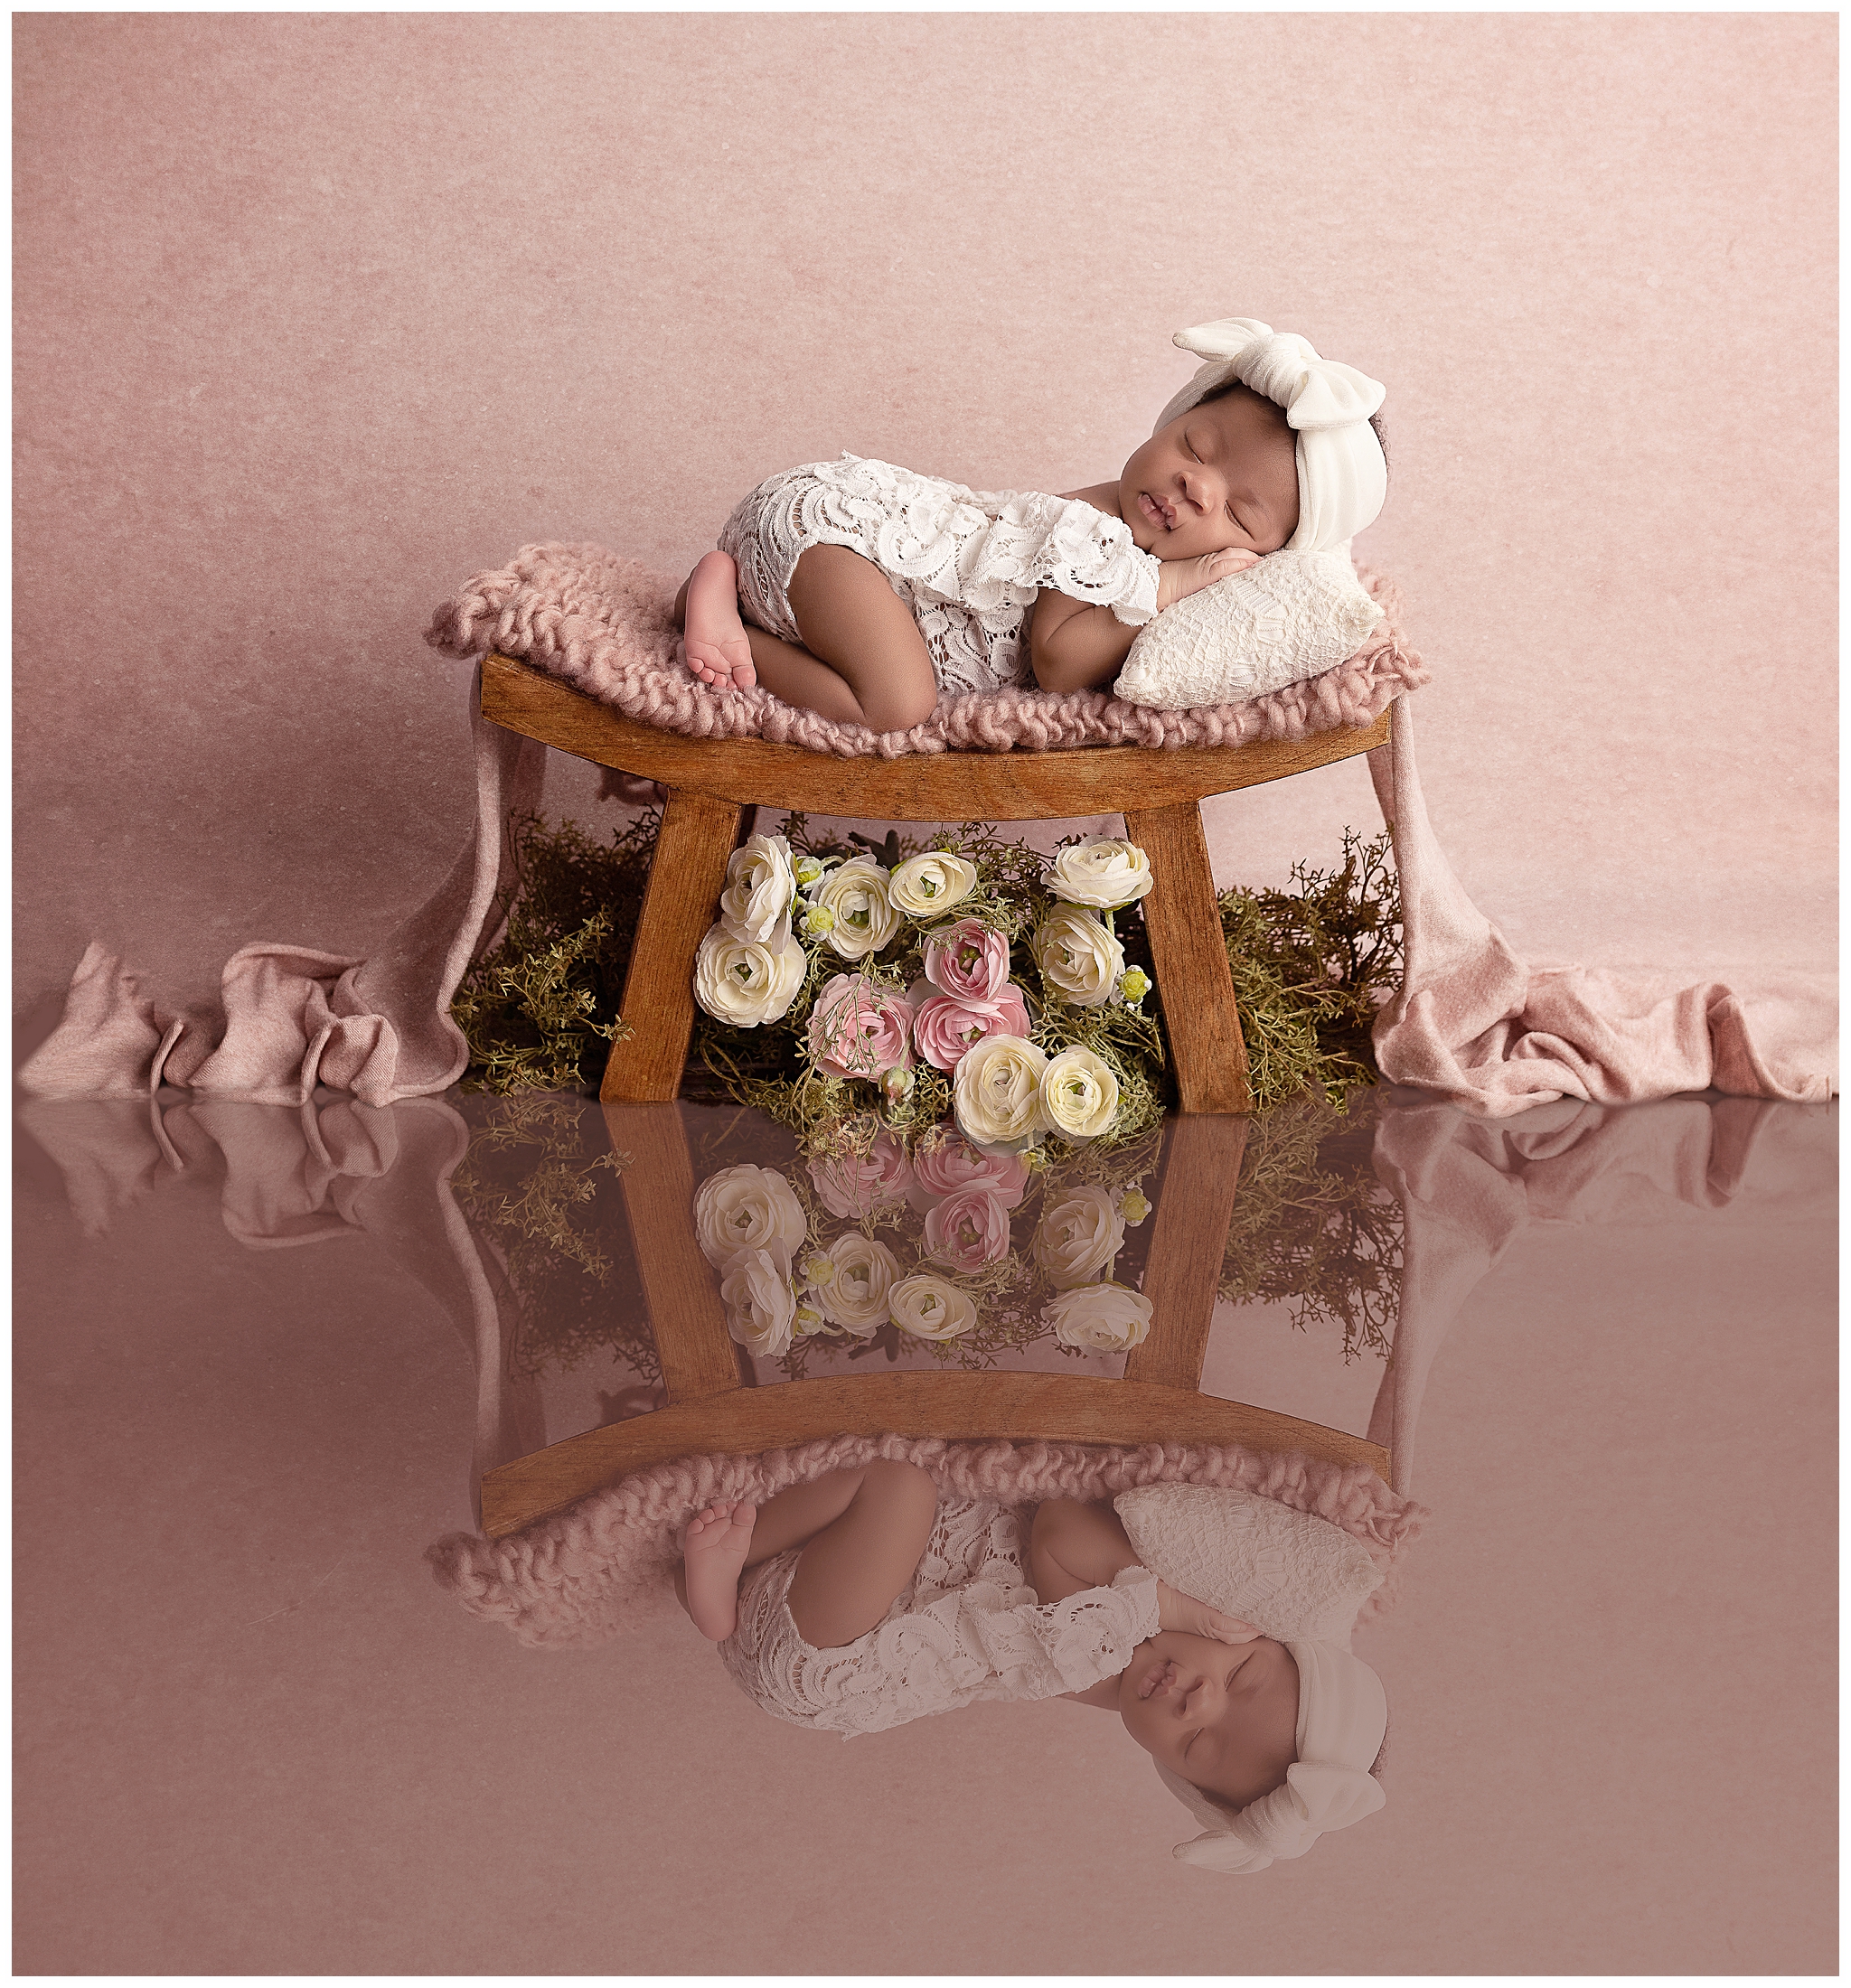 African American sleeping newborn in white lace posed on a bed over flowers and a pink backgound